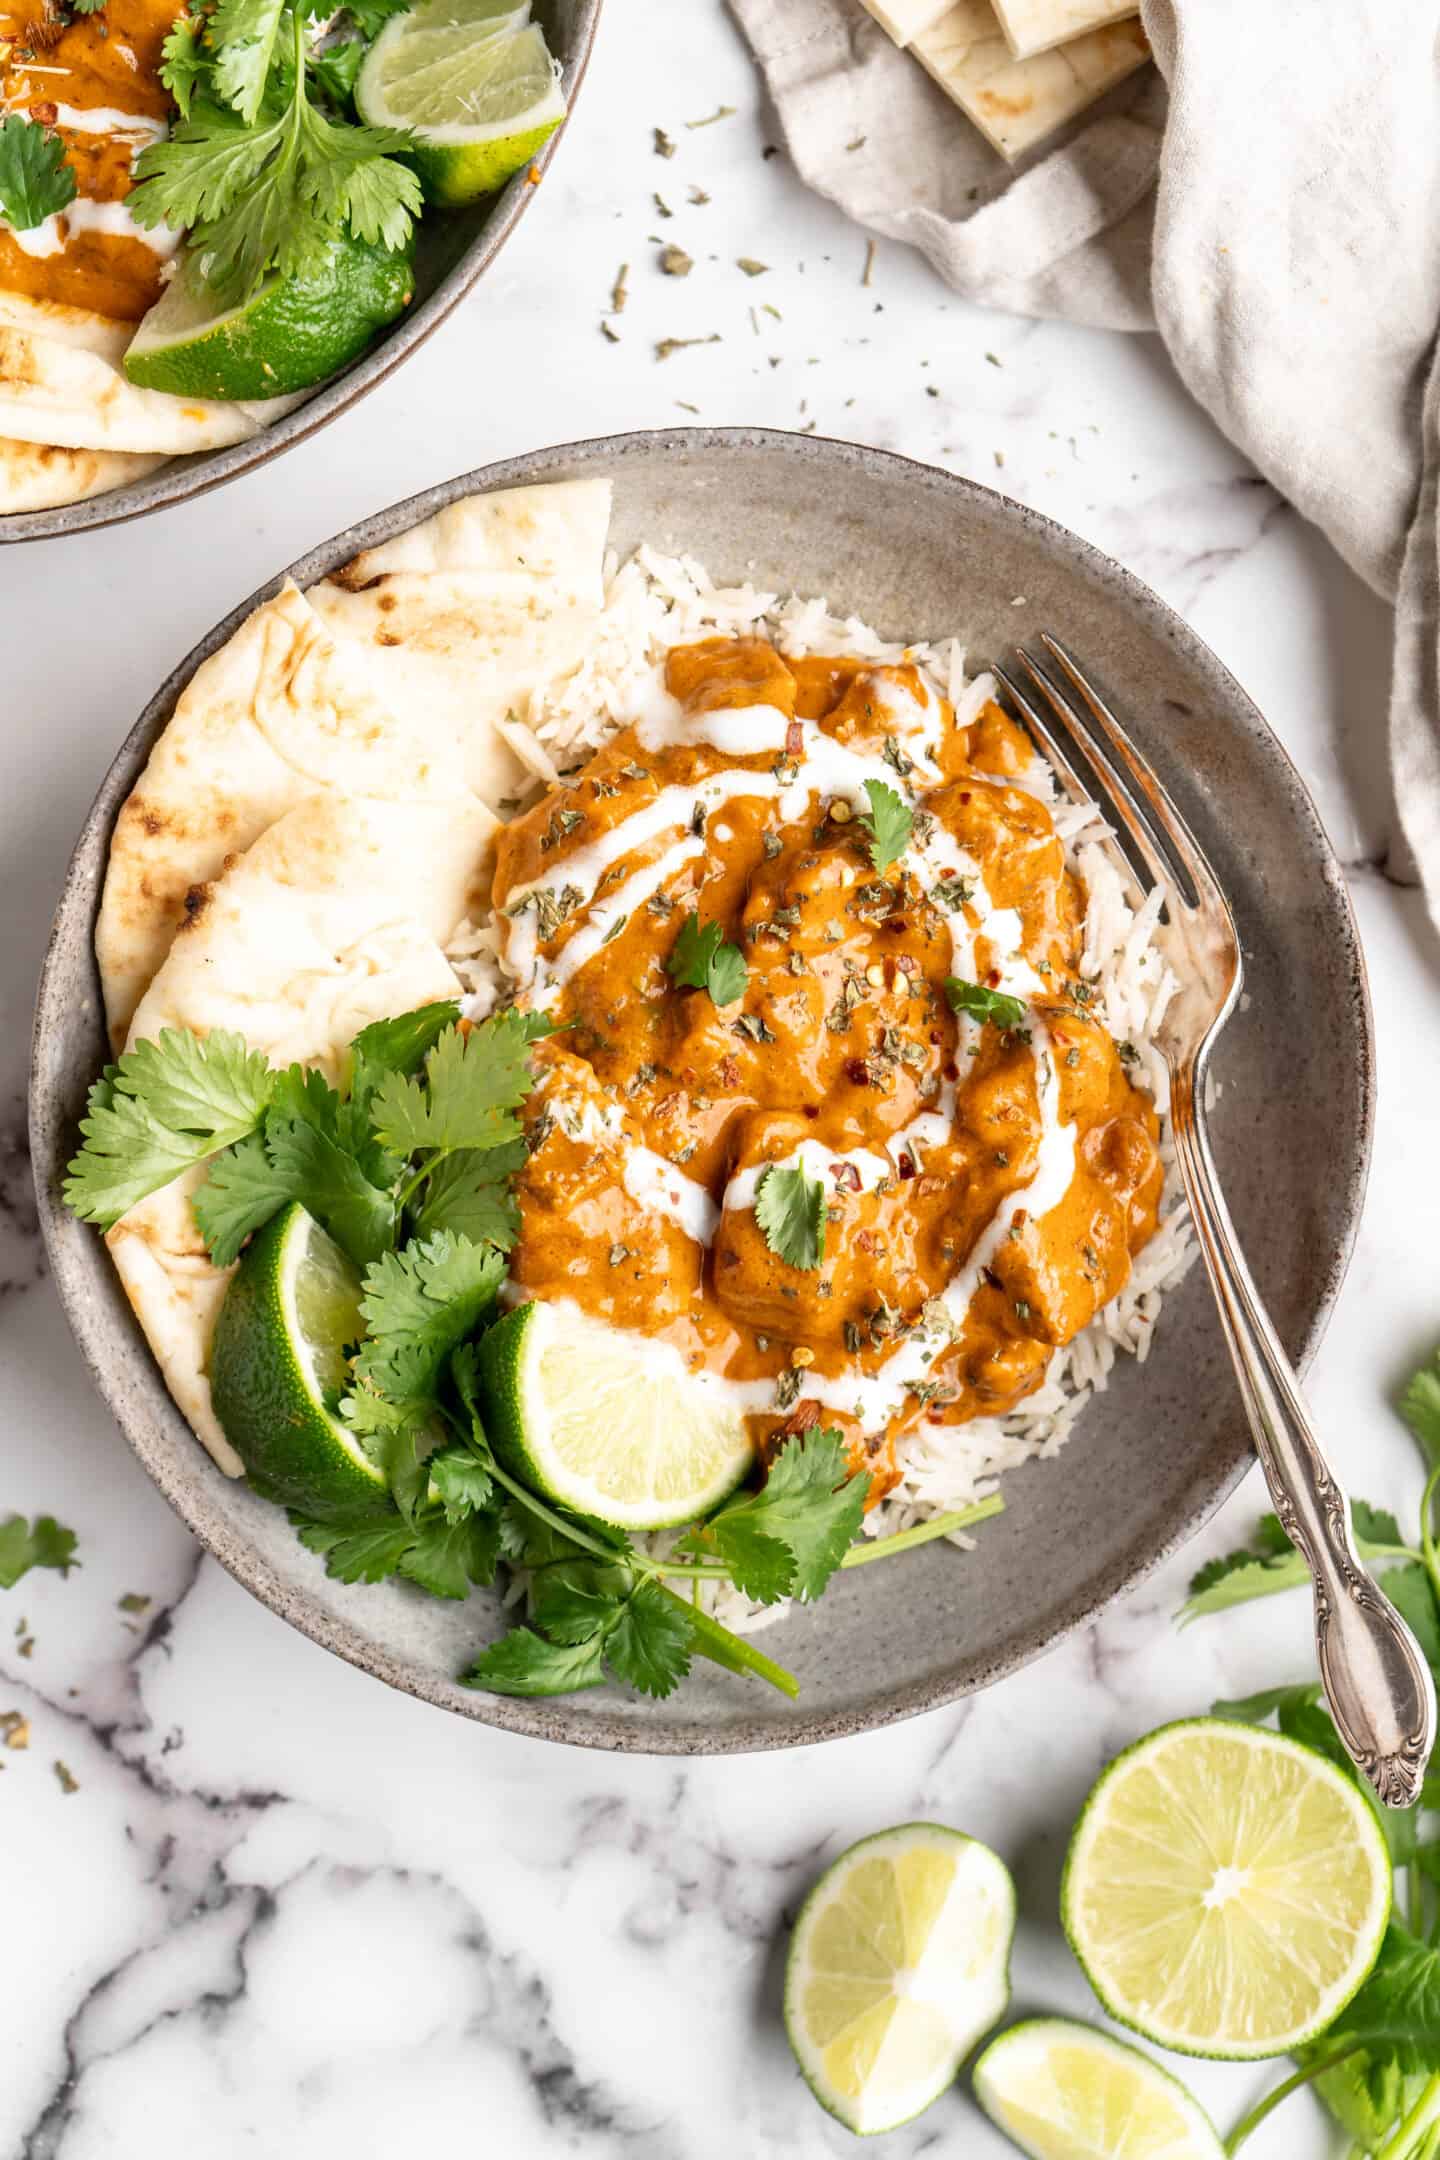 Vegan butter chicken in bowl with rice, naan, and garnishes